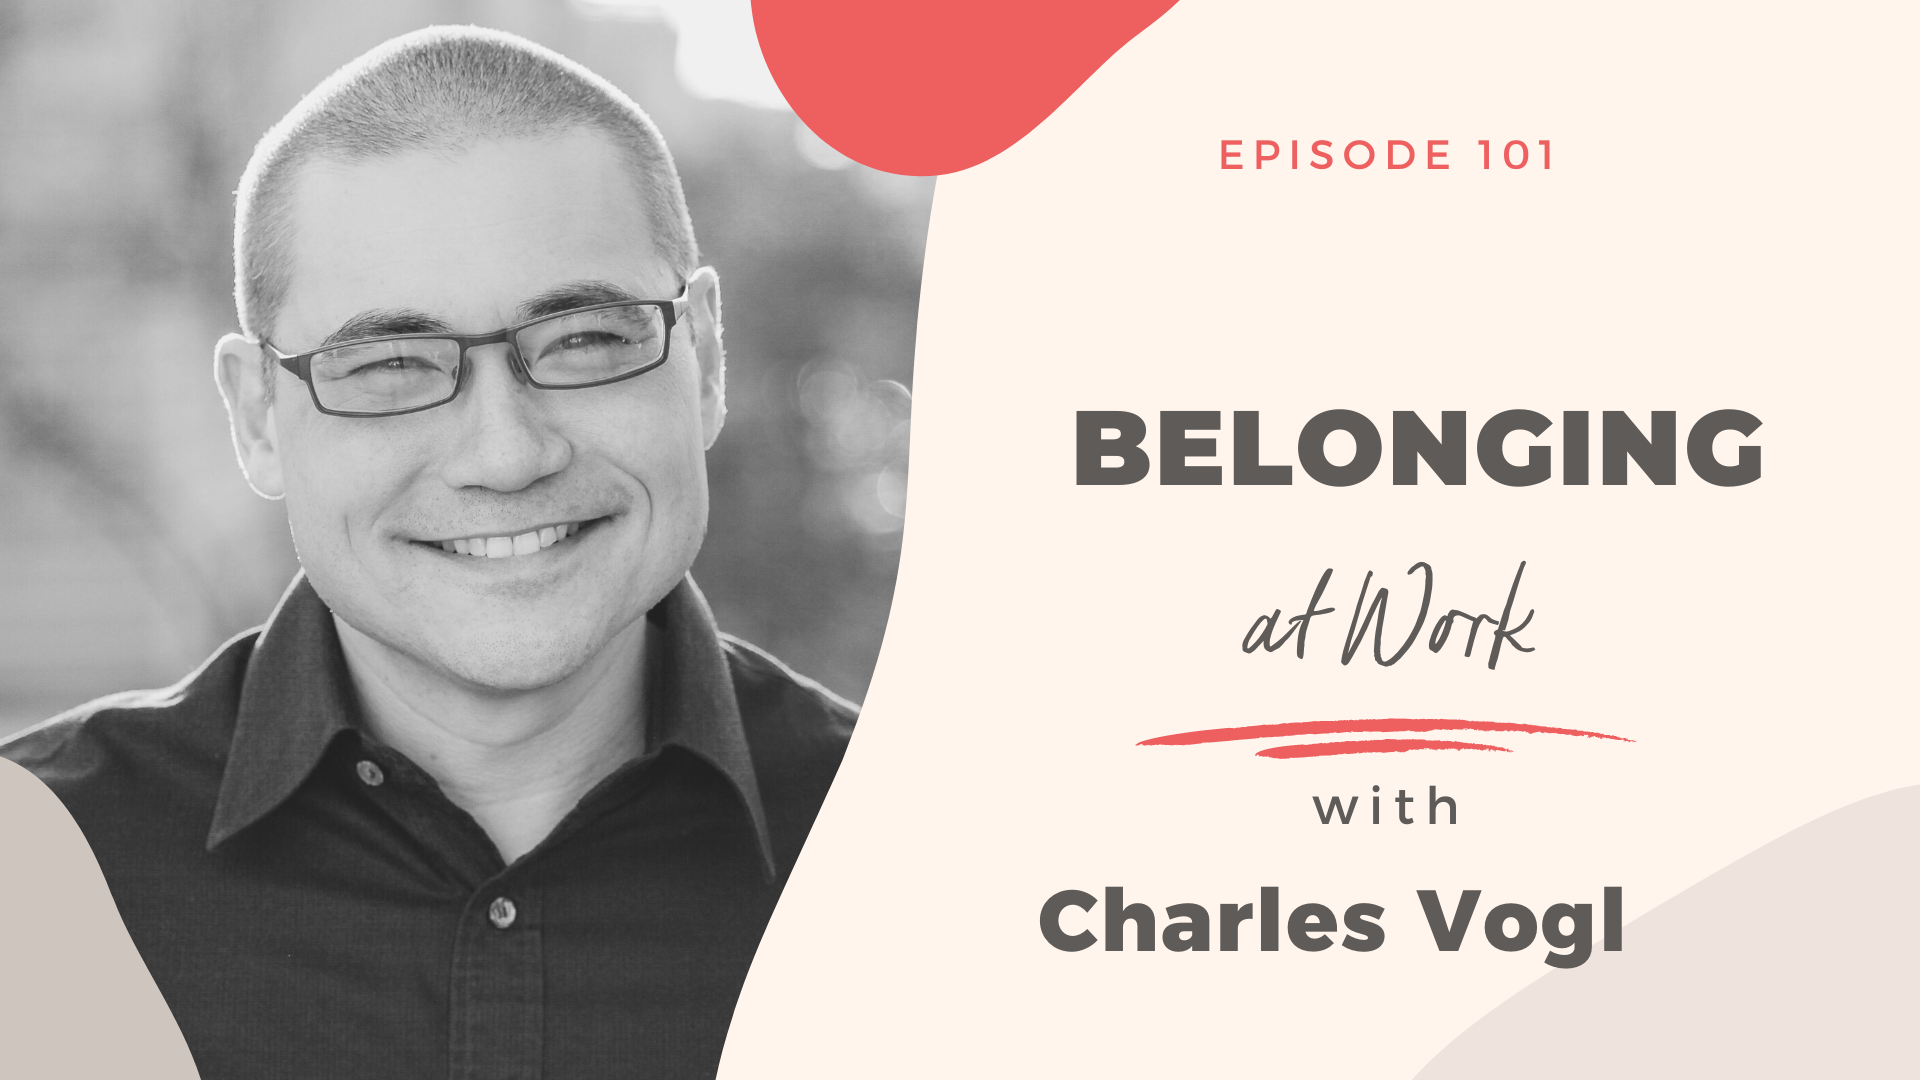 Charles Vogl at the CultureLab podcast